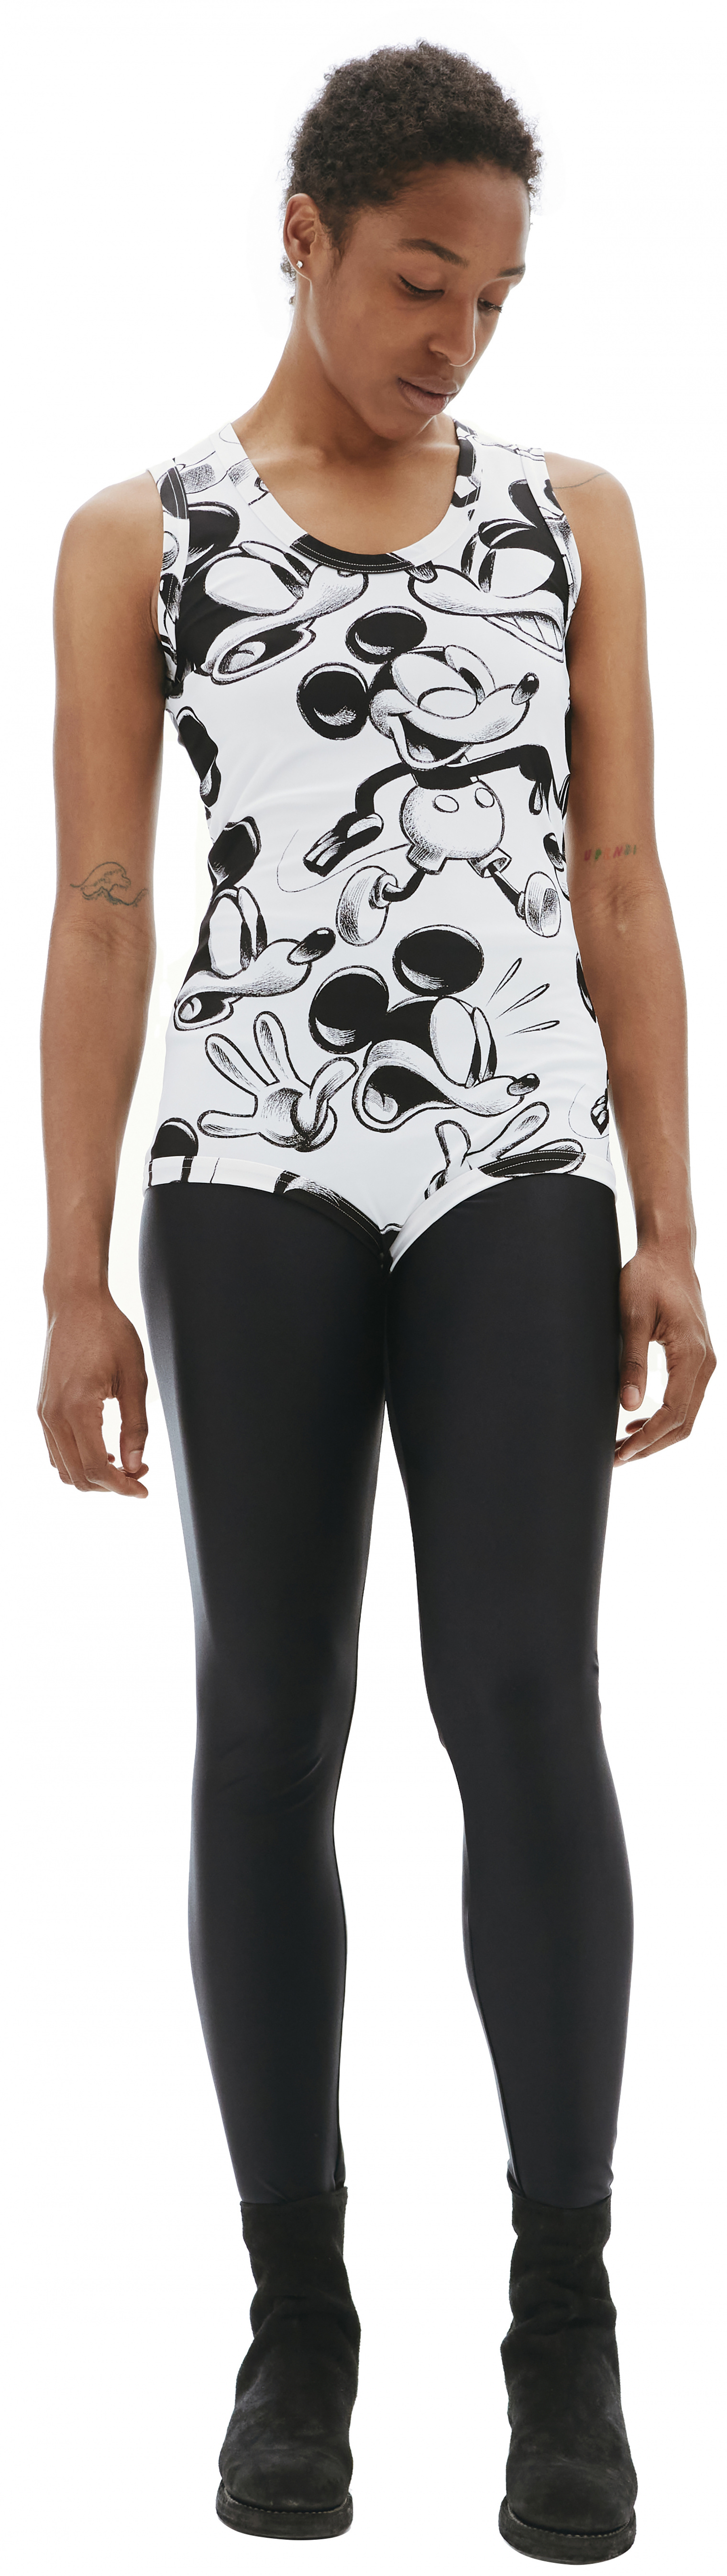 Comme des Garcons CdG Mickey Mouse Printed Bodysuit